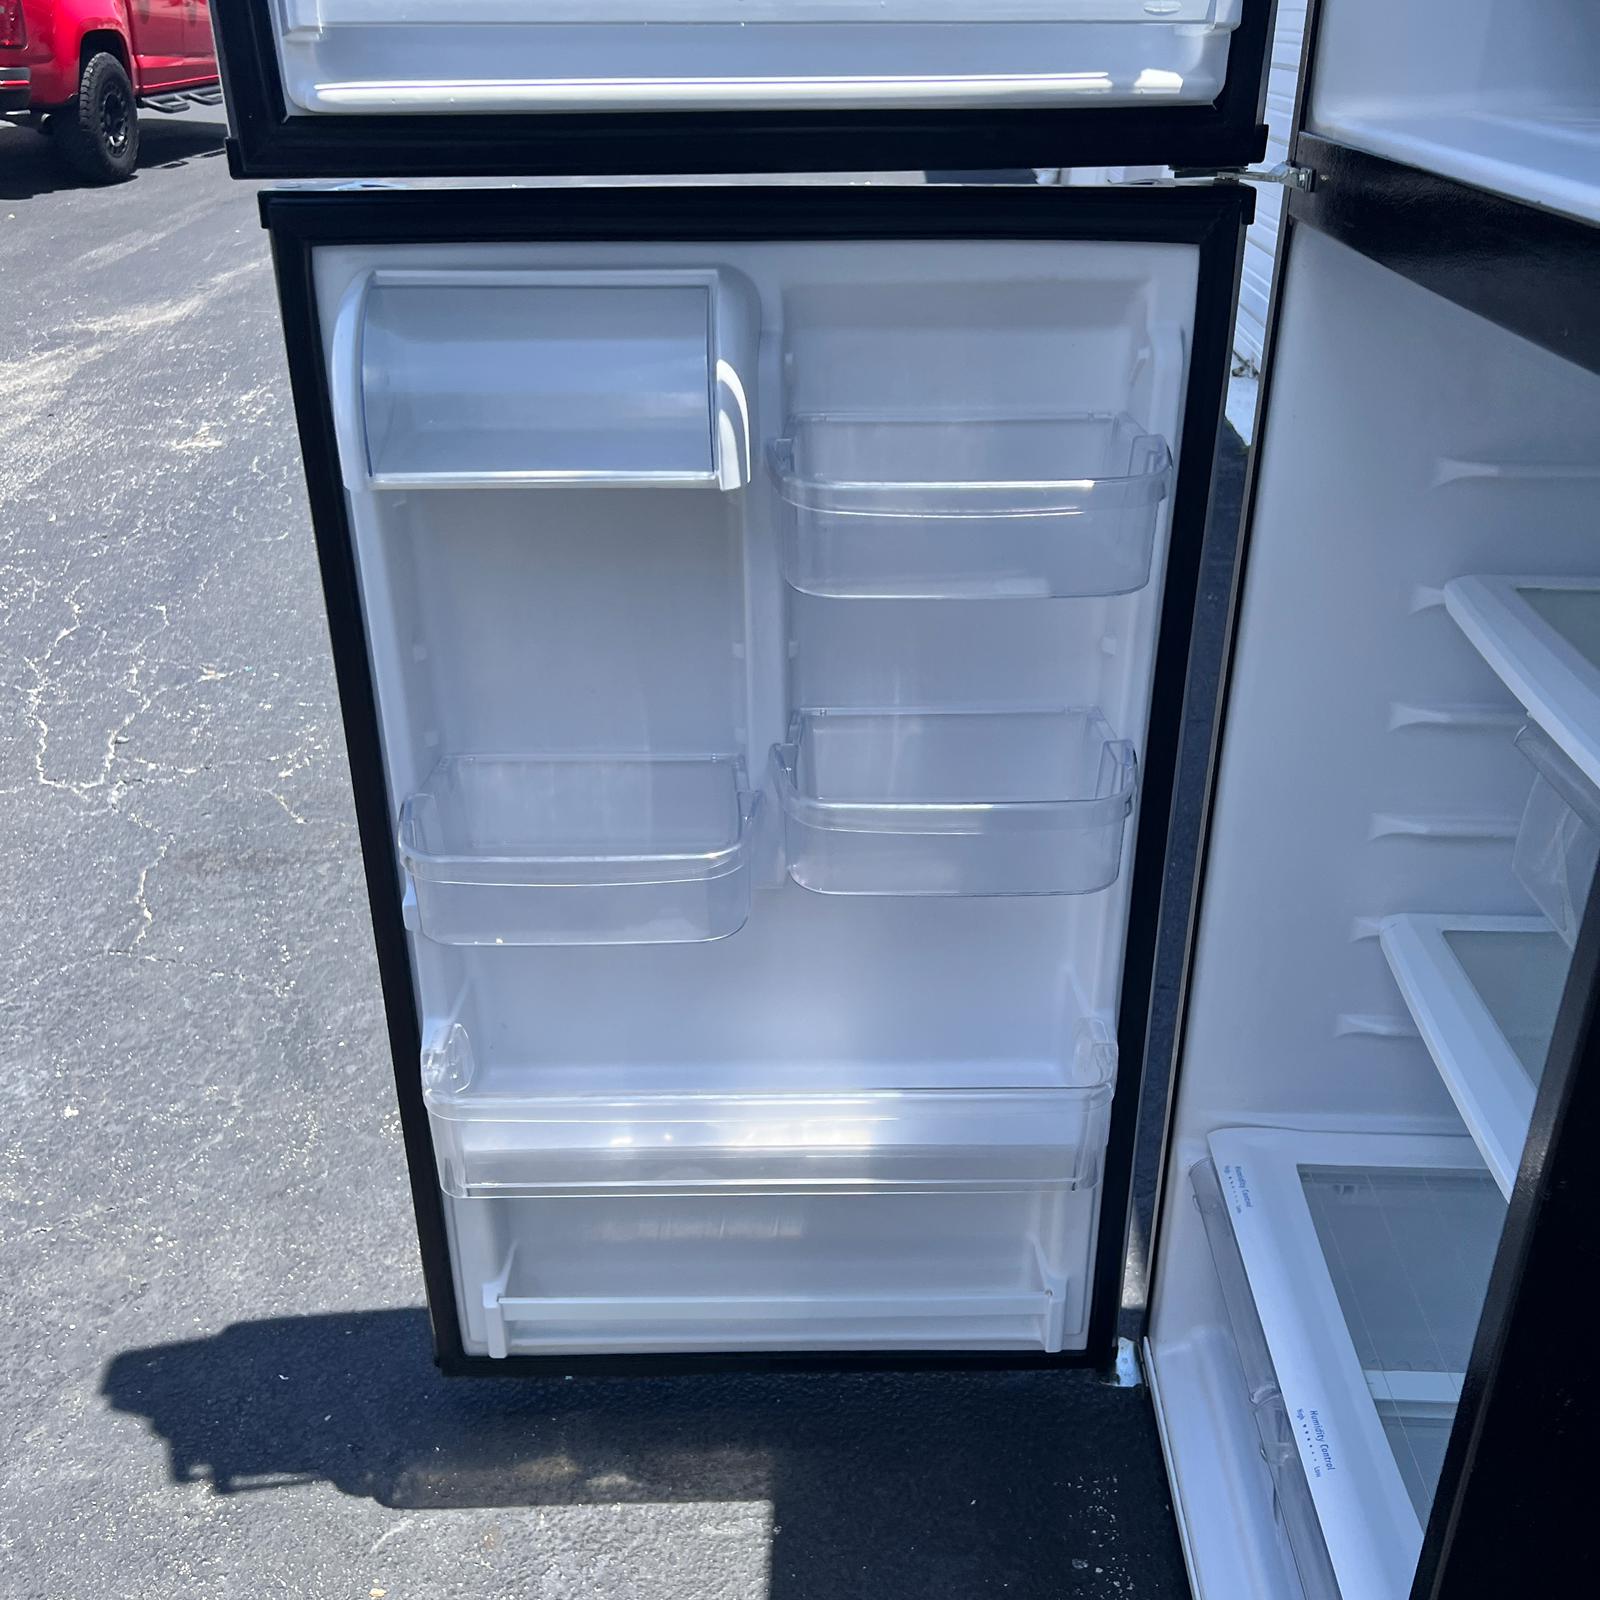 Whirlpool Stainless Steel Top and Bottom Refrigerator with Ice maker